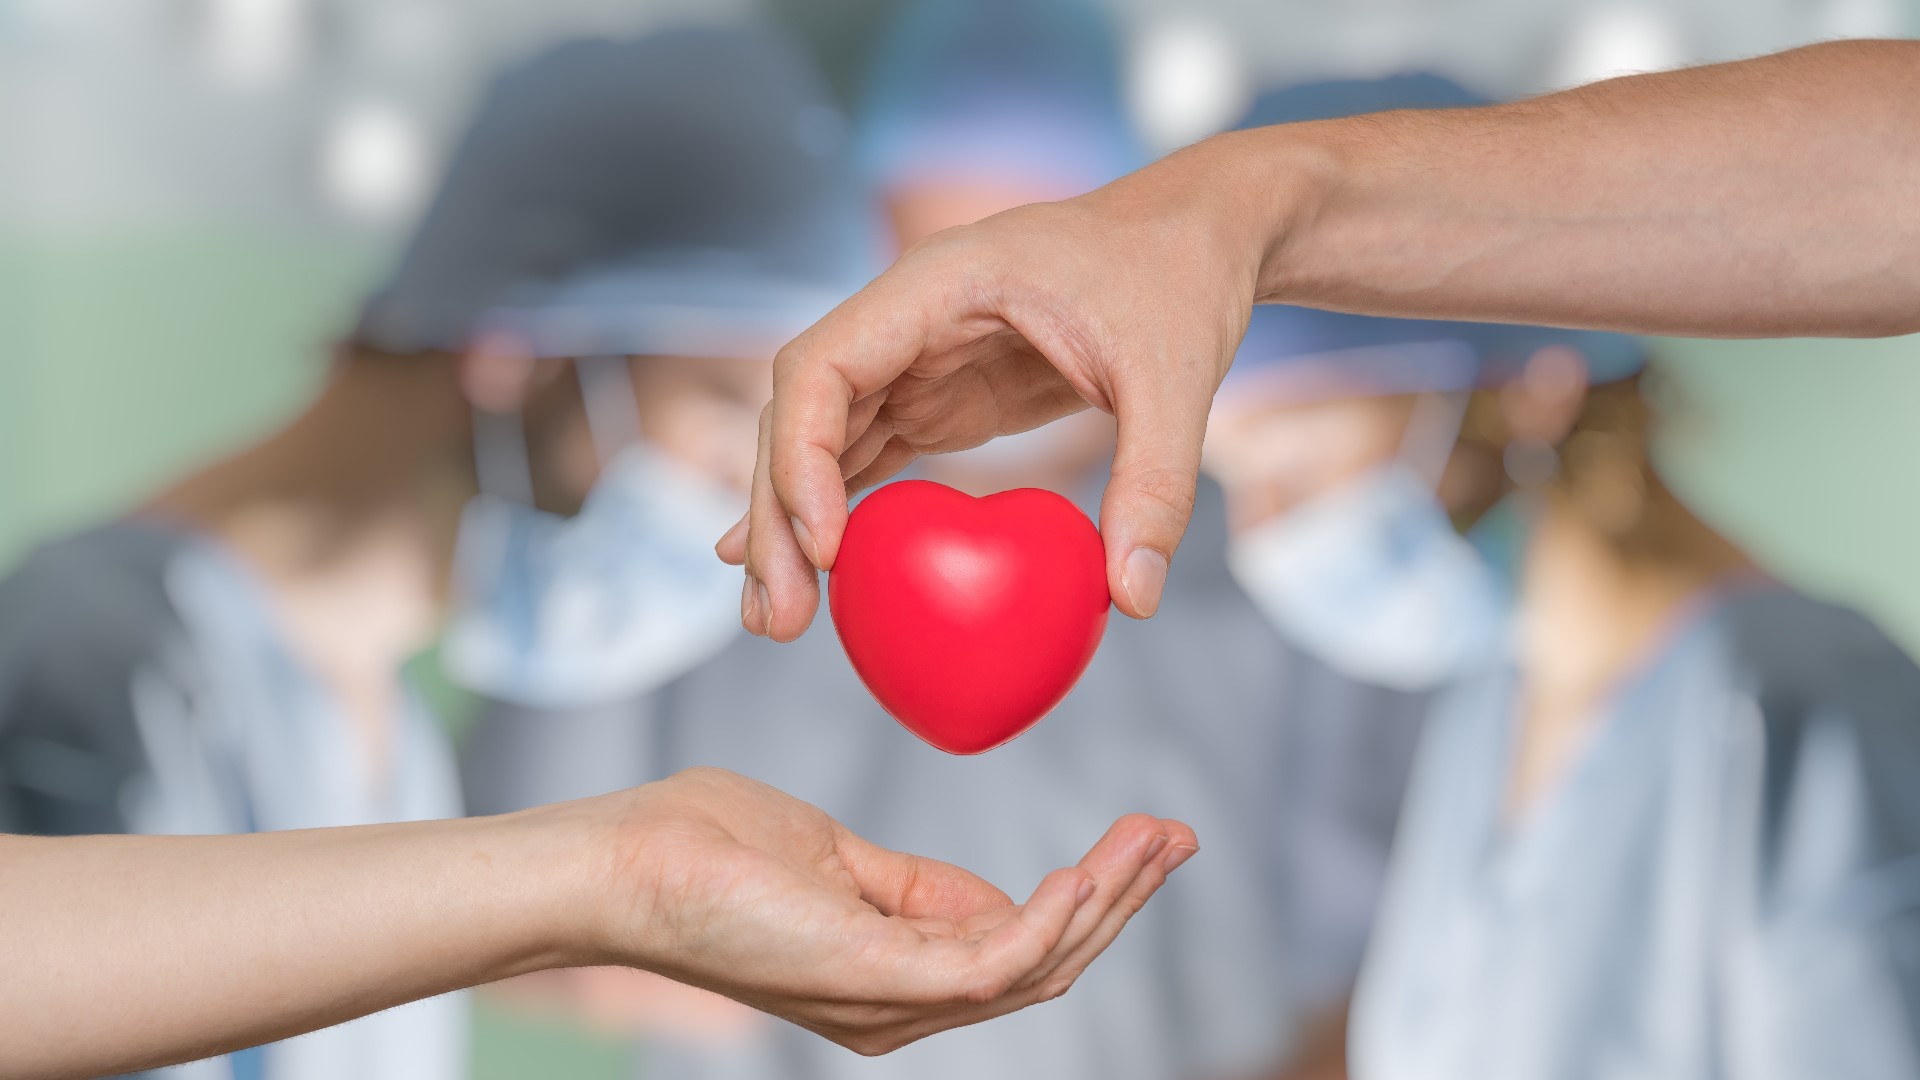 We're raising awareness about organ donations by breaking down common myths. Also, 5 On Your Side's Anne Allred shares her own experience as an organ recepient.